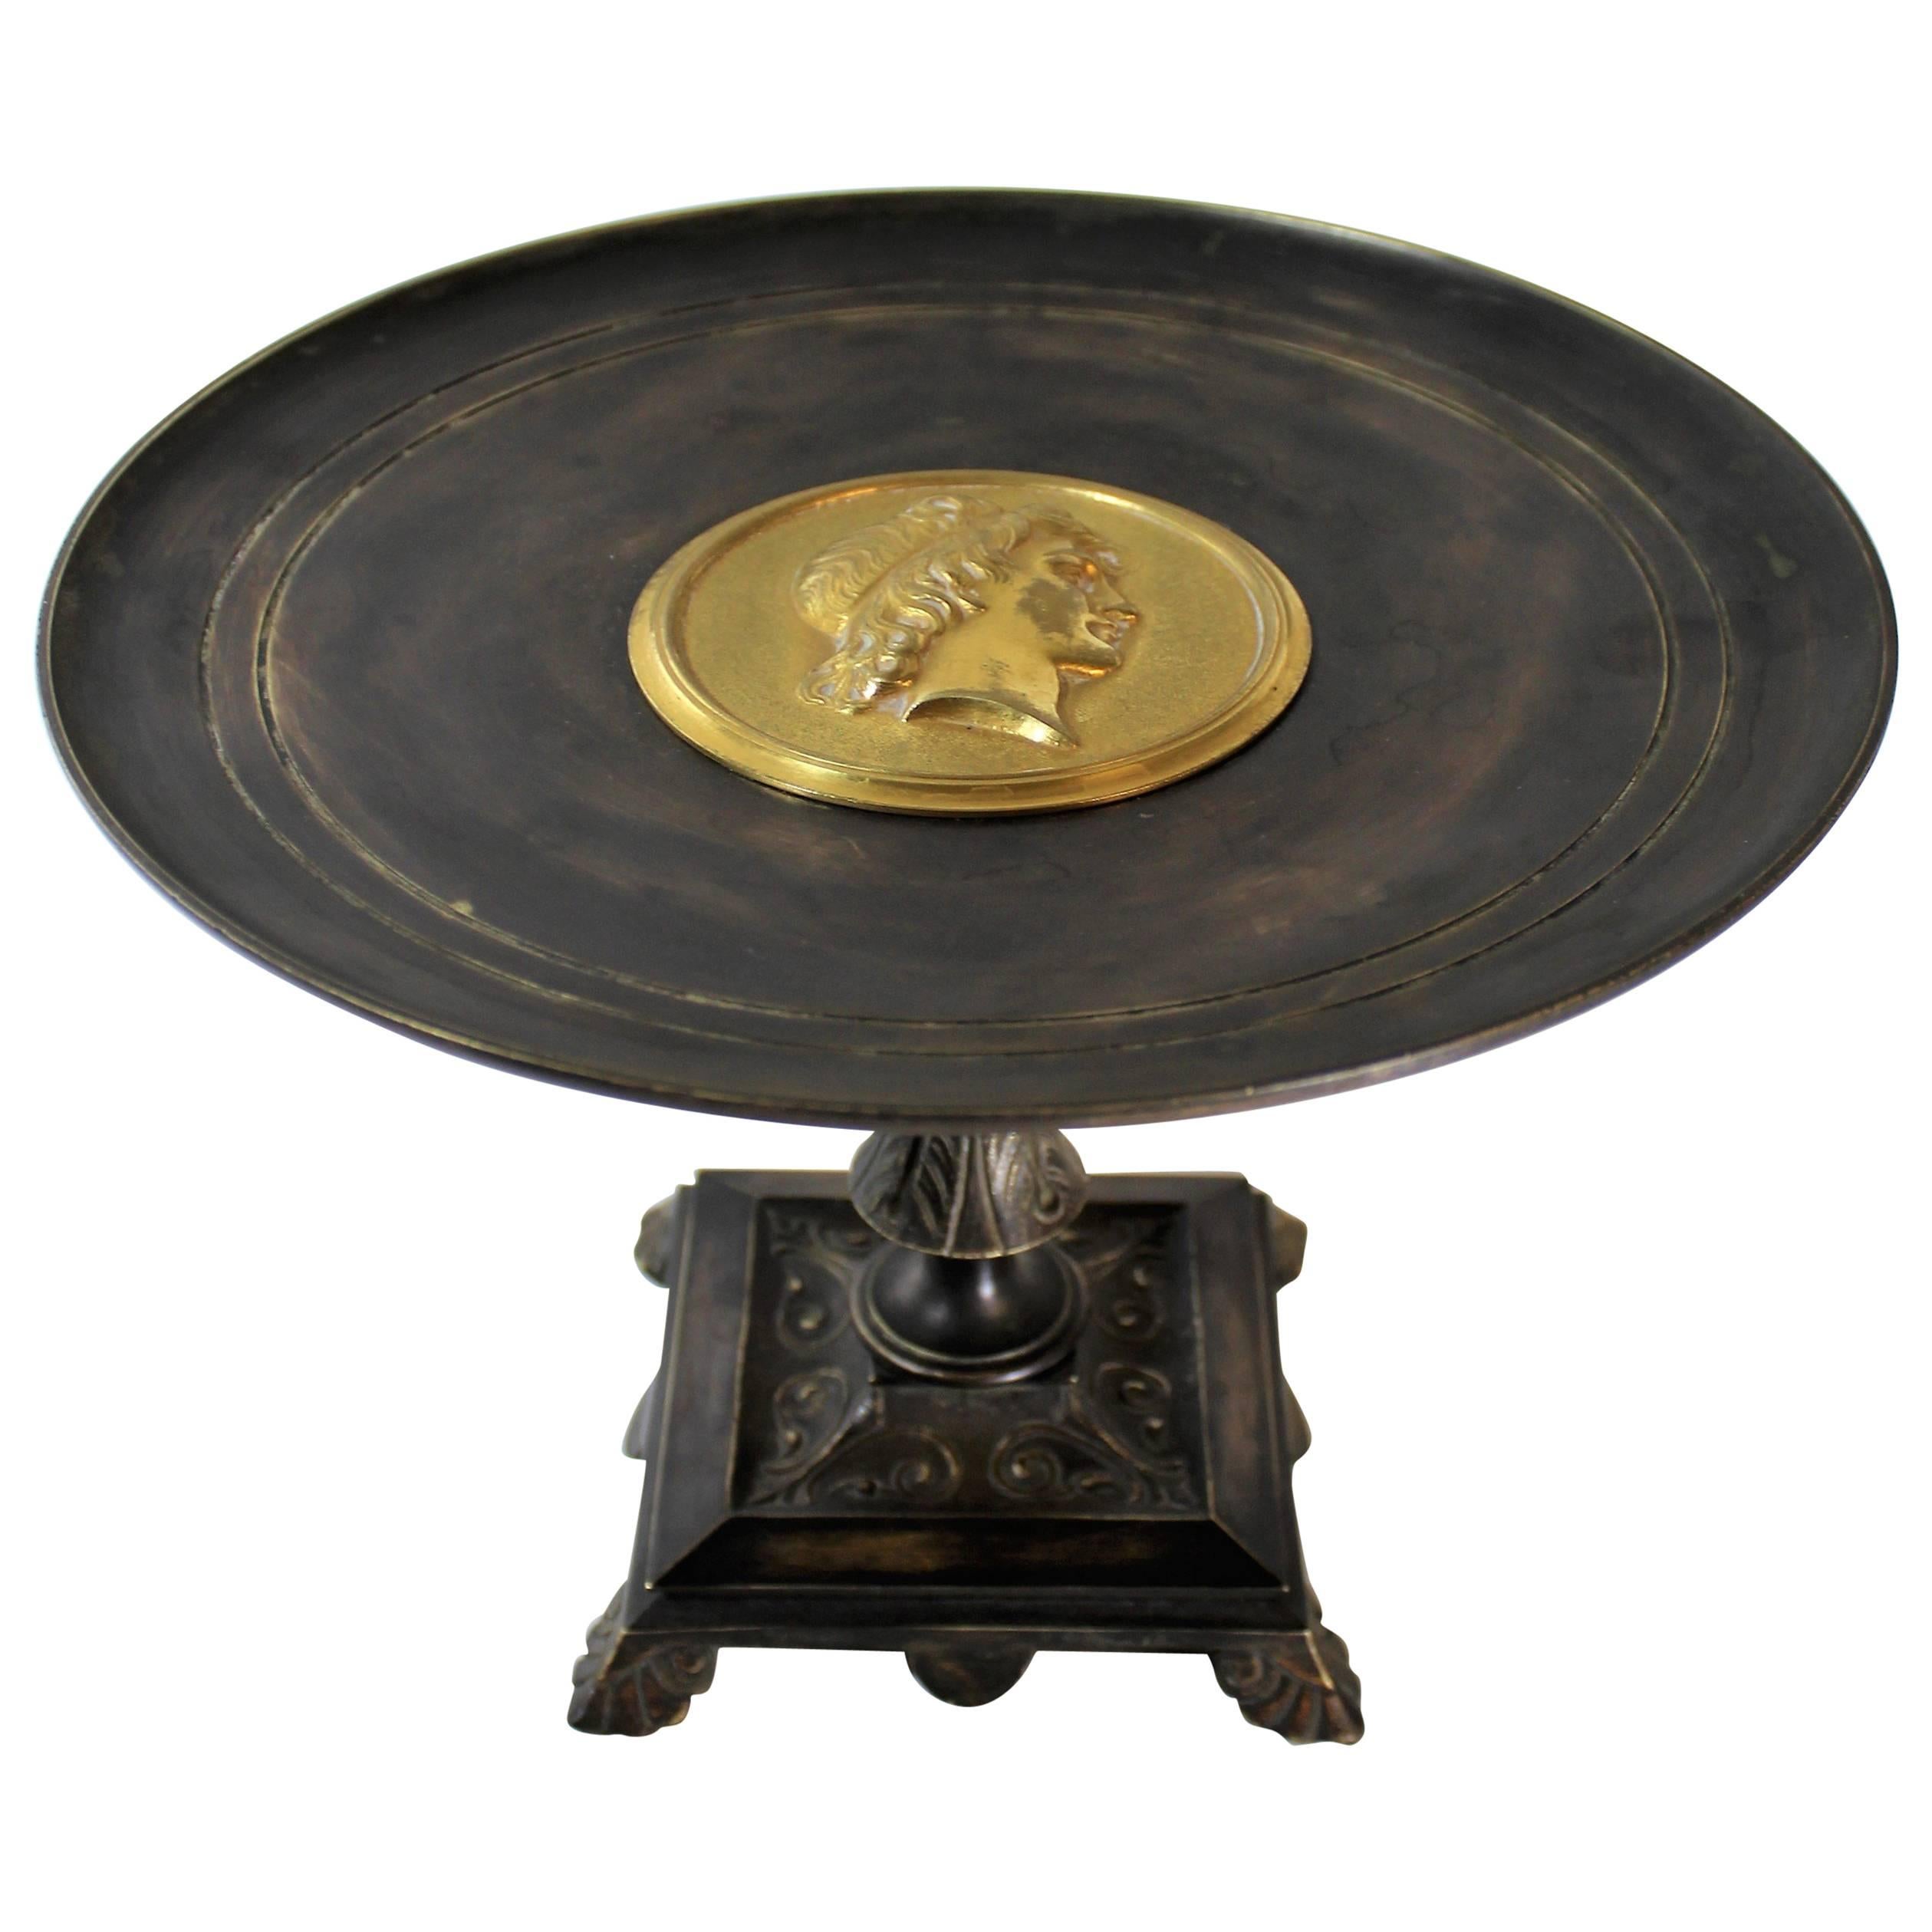 19th Century Neoclassical Bronze and Ebonized Tazza with Gold Gilt Medallion